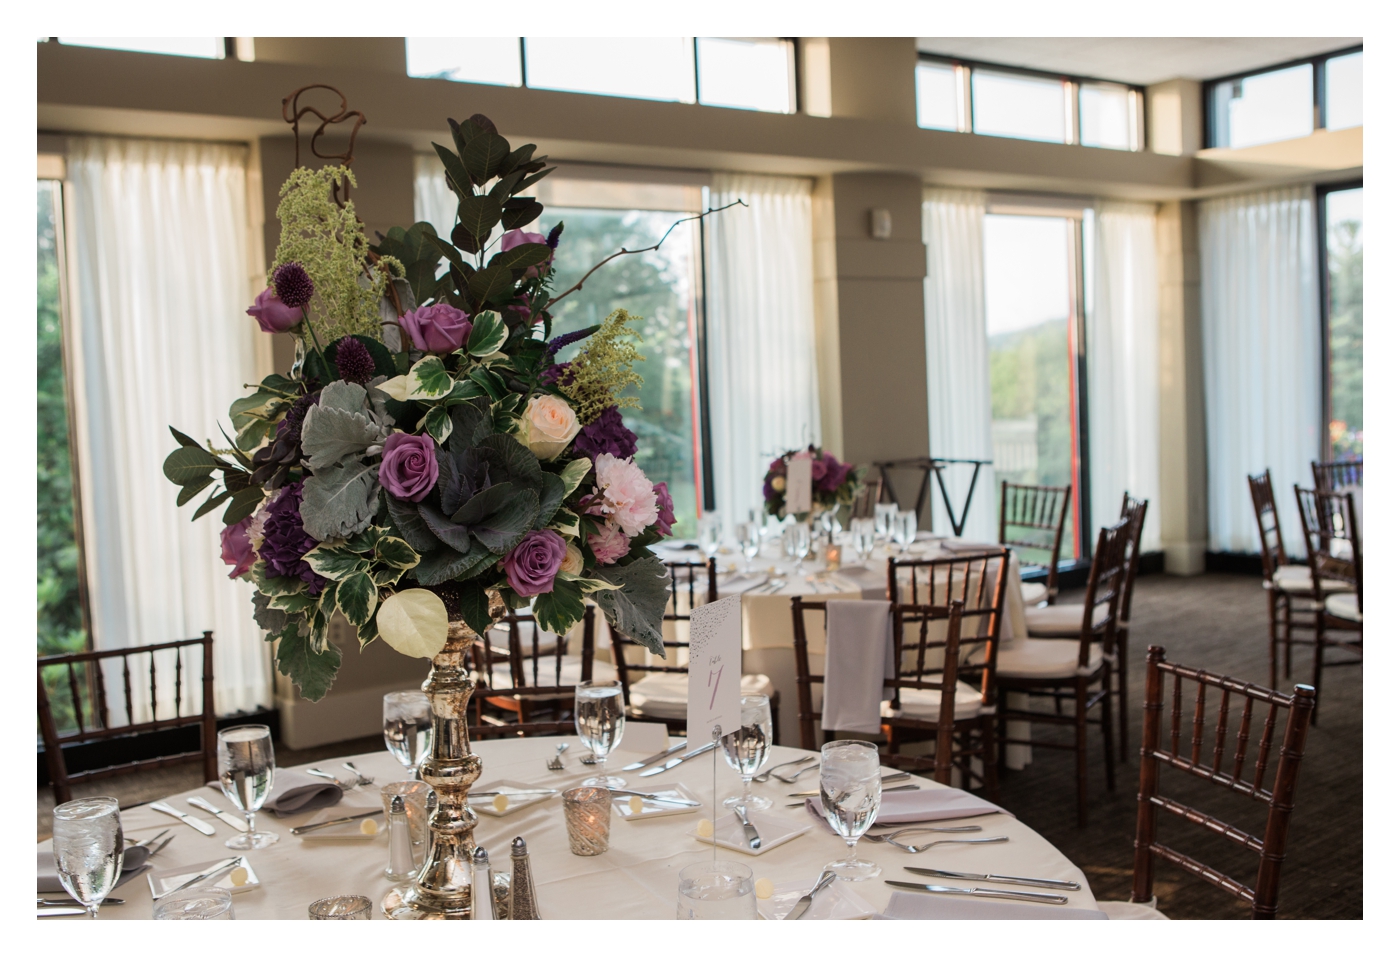 Ipswich Country Club - Rachel and Mike - Michele Ashley Photography